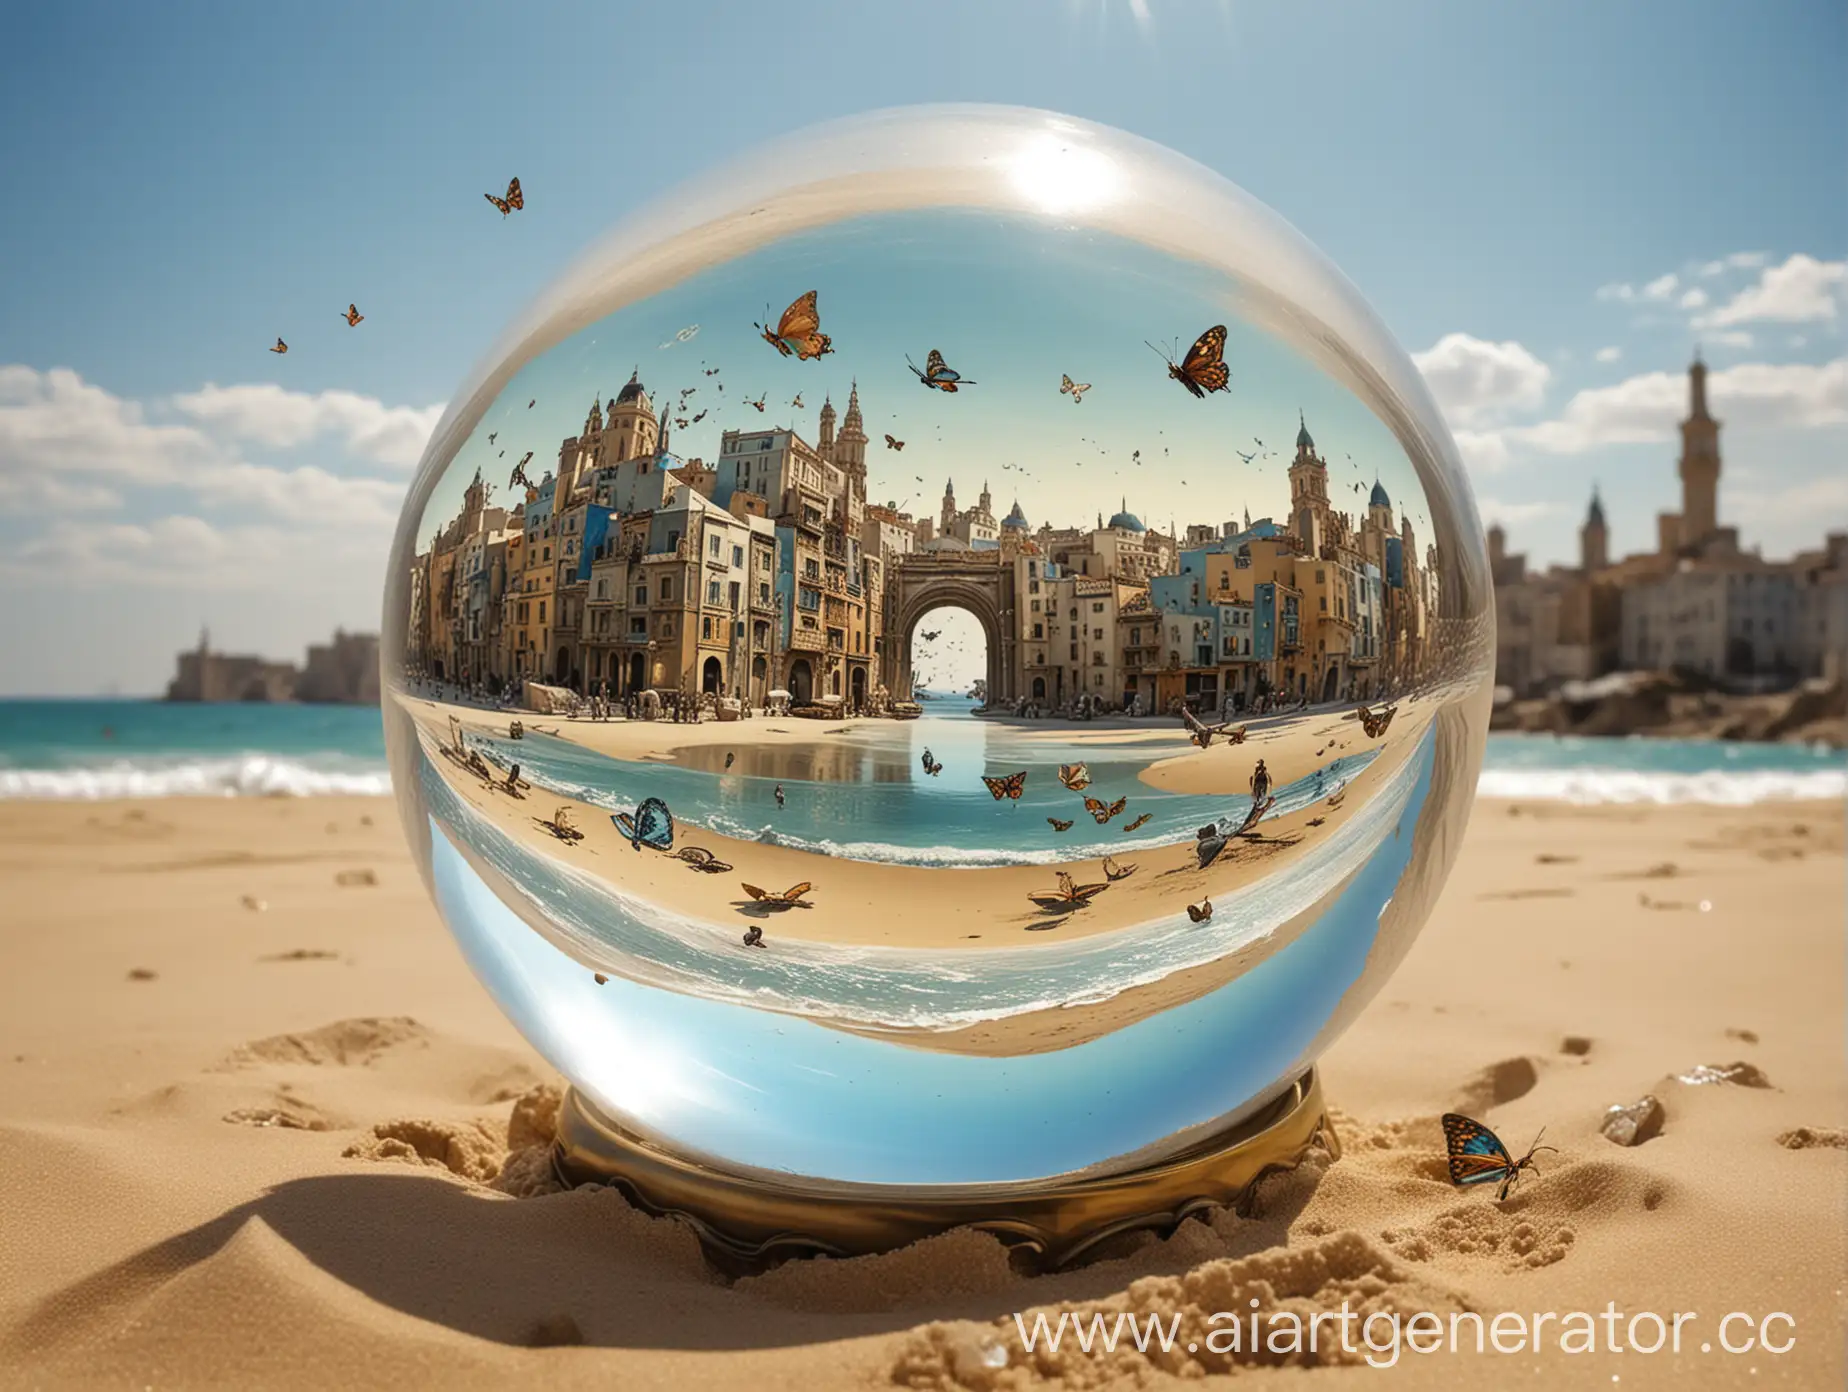 Surreal-Seascape-with-Crystal-Ball-and-Flying-Butterflies